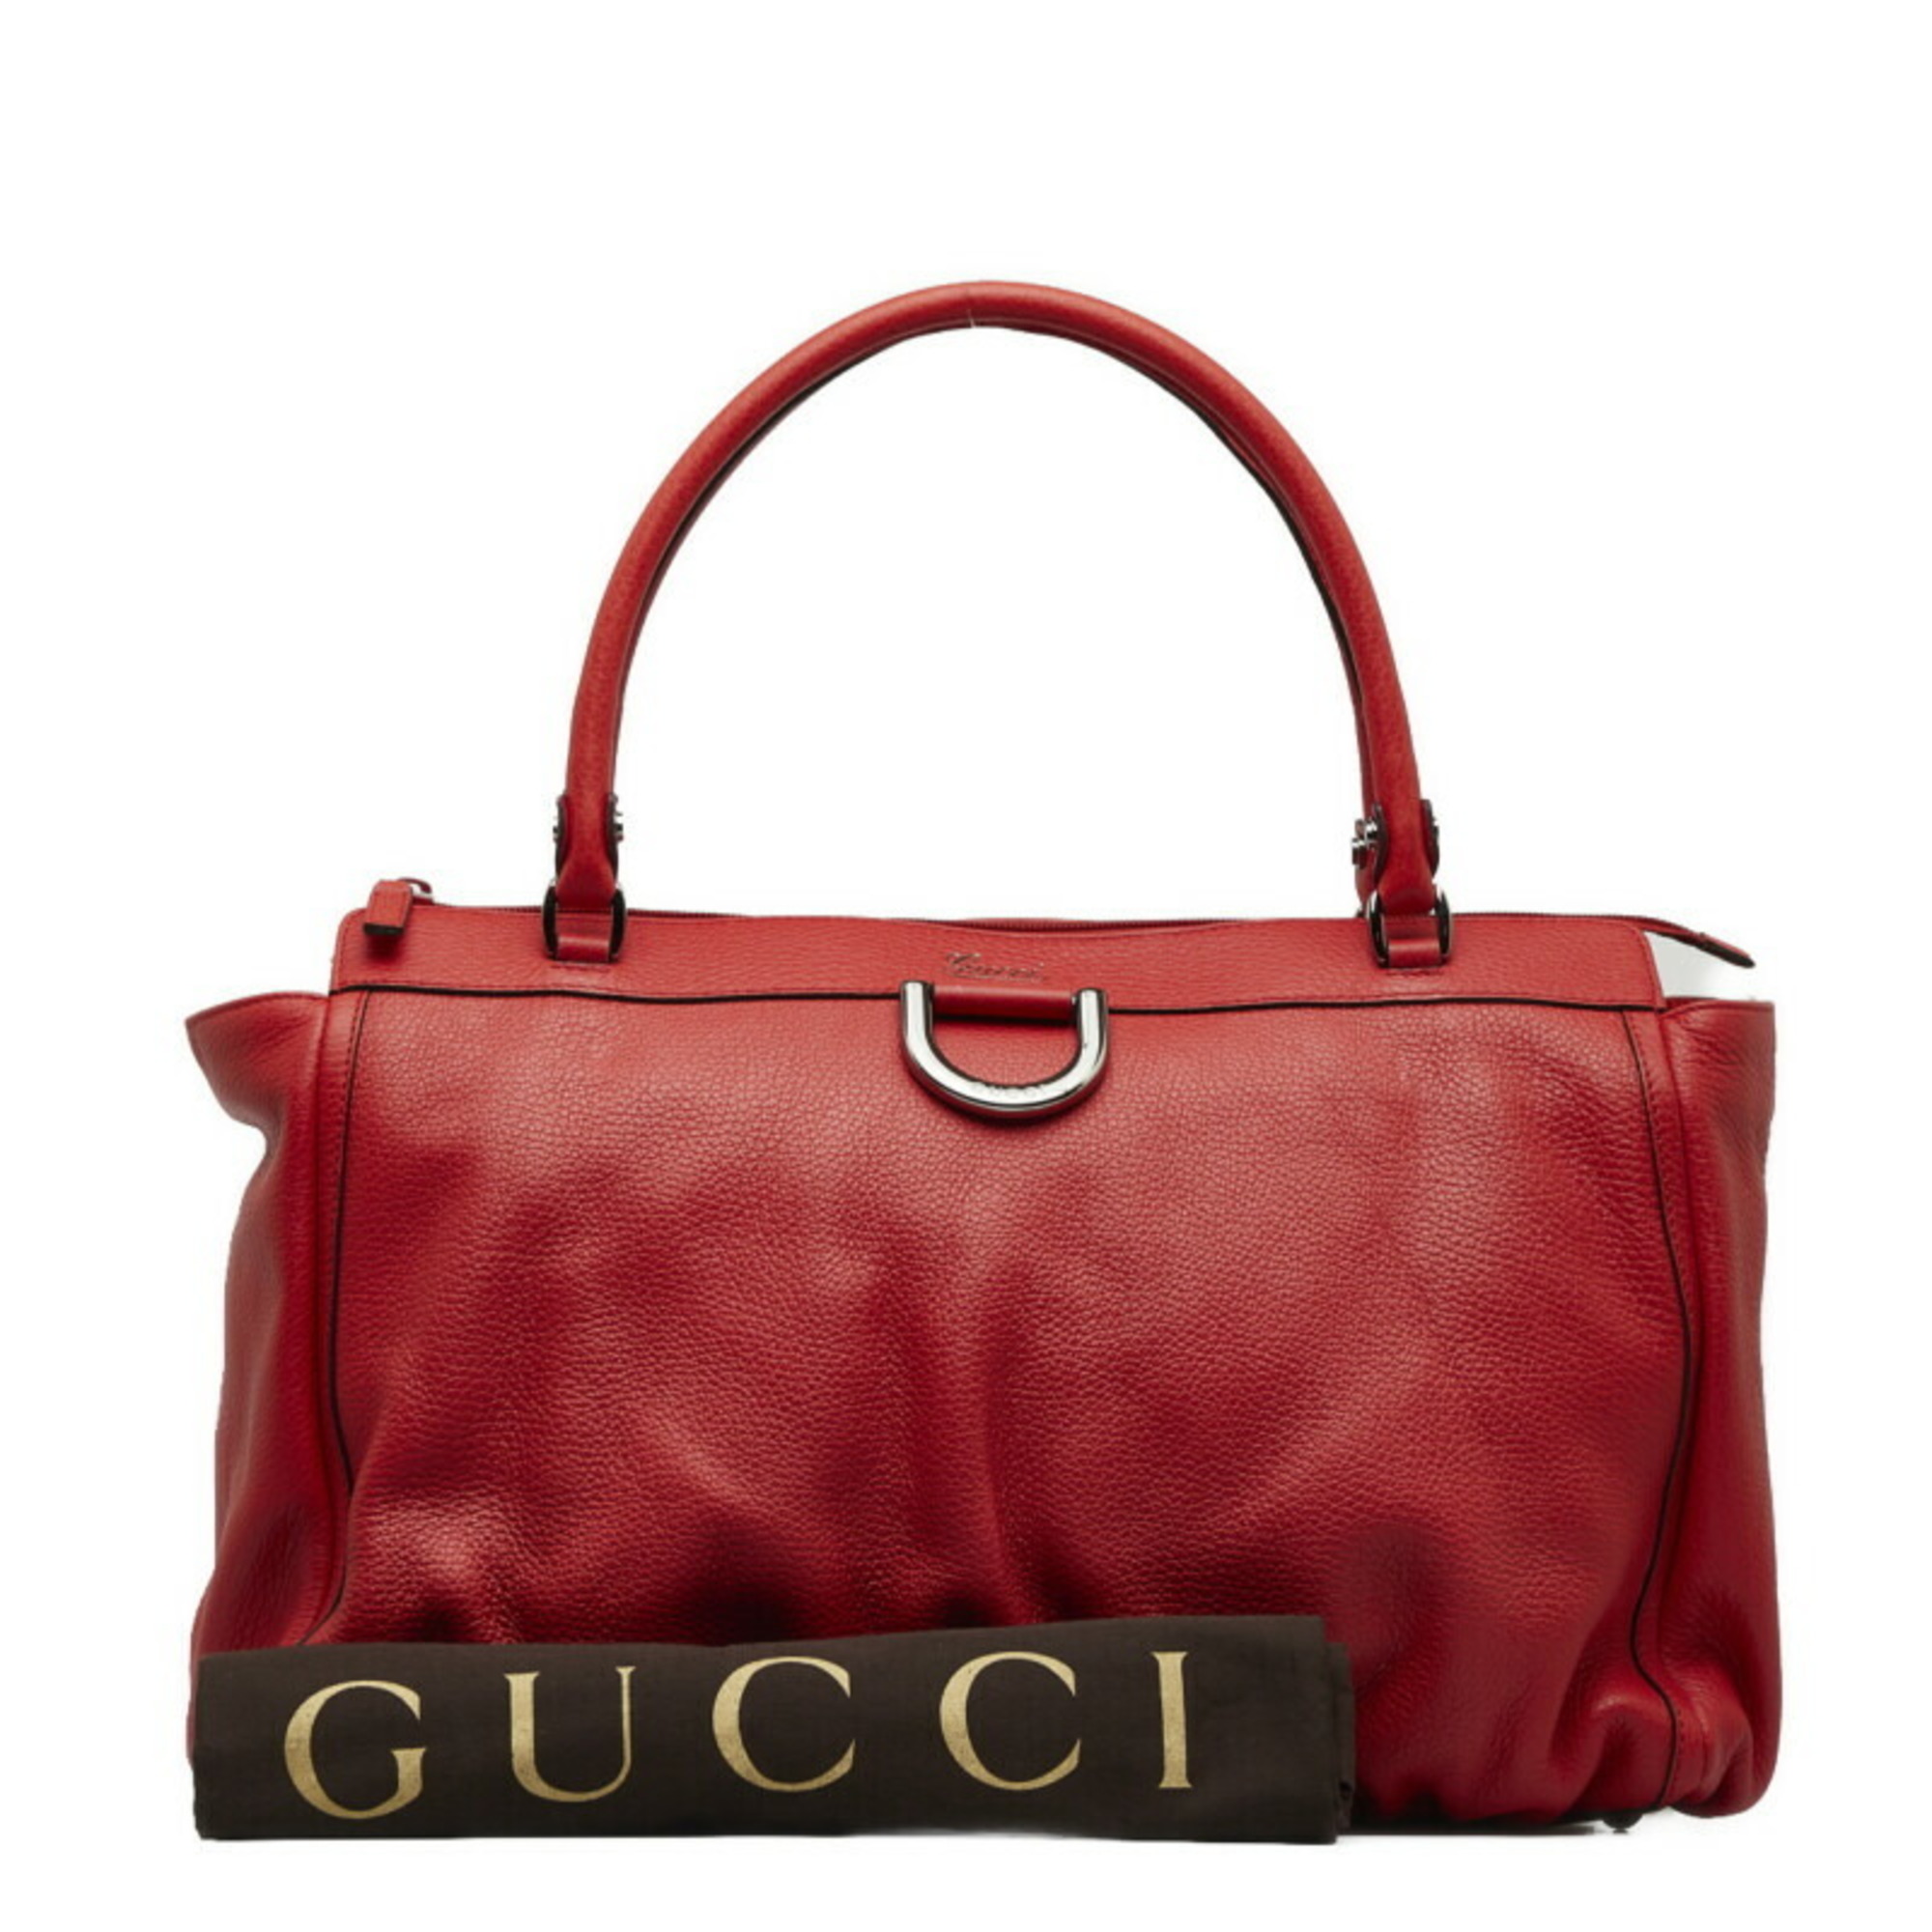 Gucci Abbey Tote Bag Shoulder 341491 Red Leather Women's GUCCI